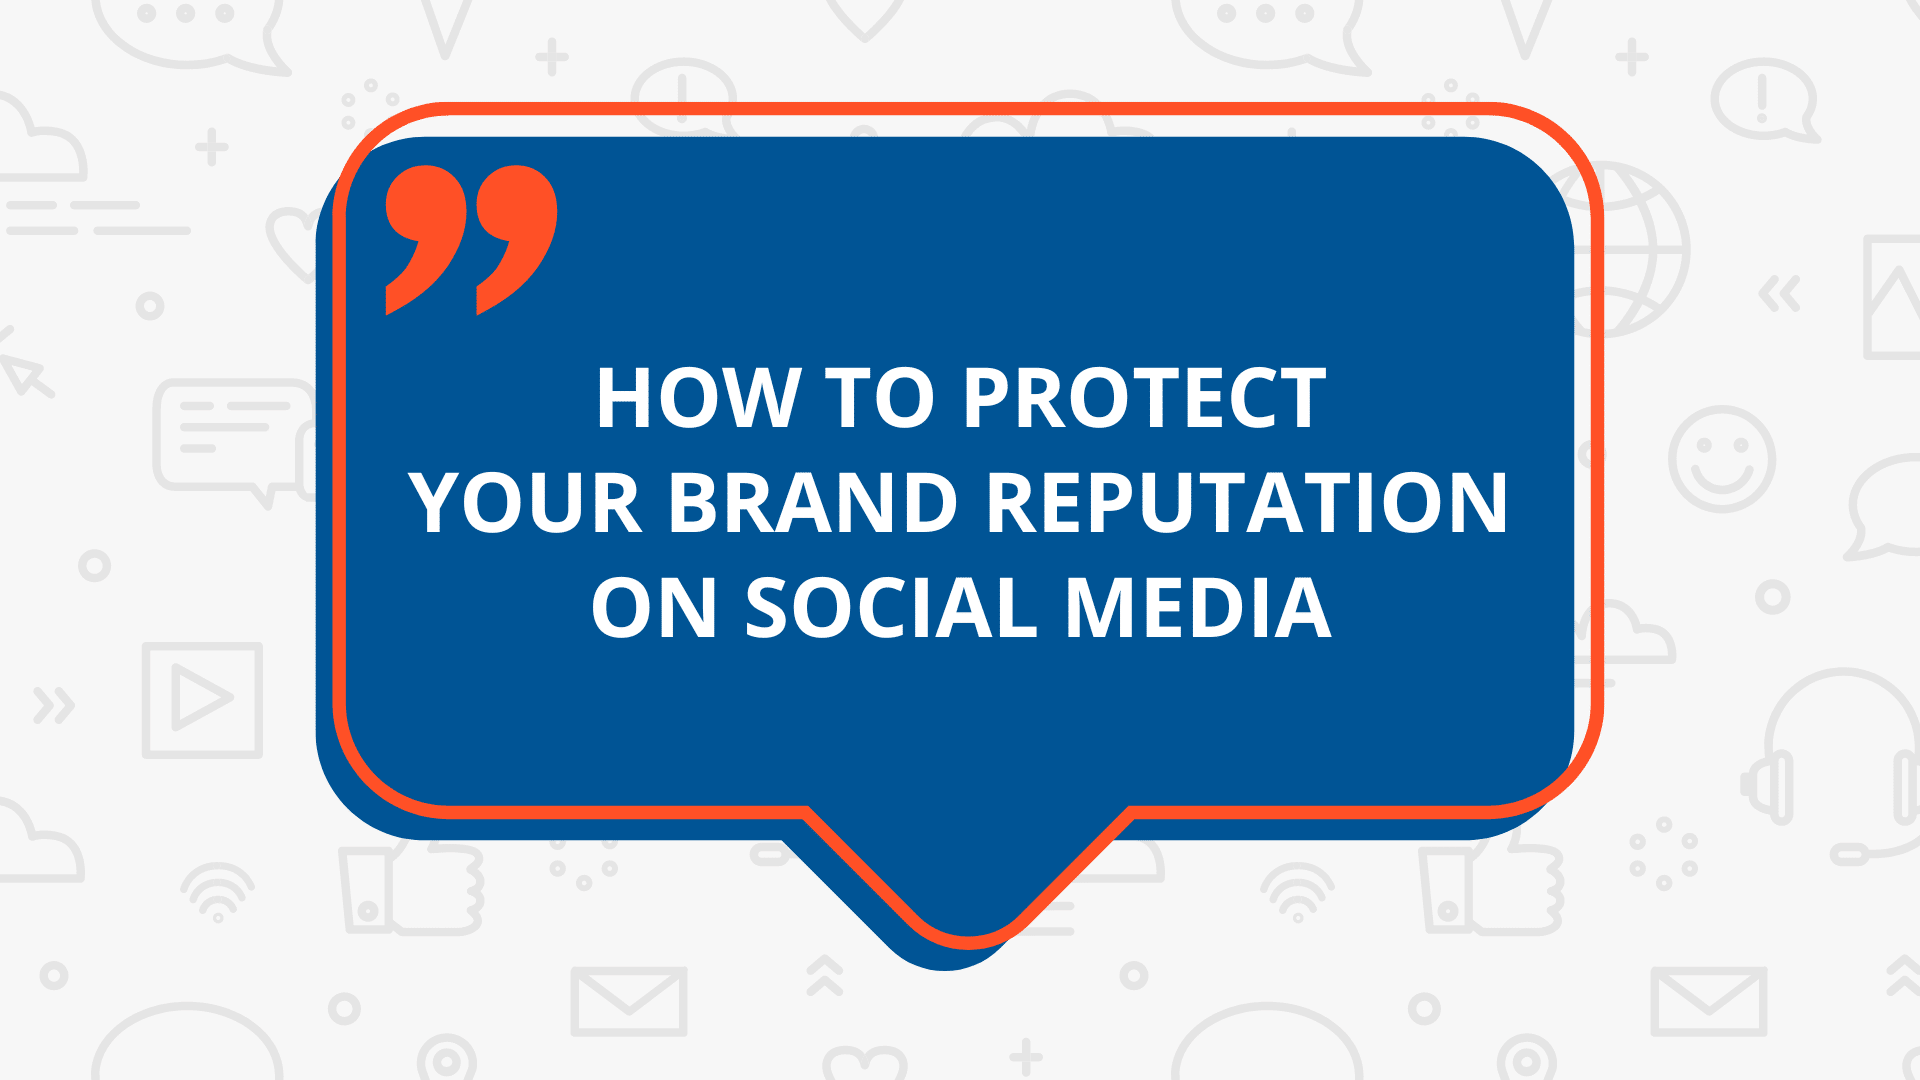 How to protect your brand reputation on social media